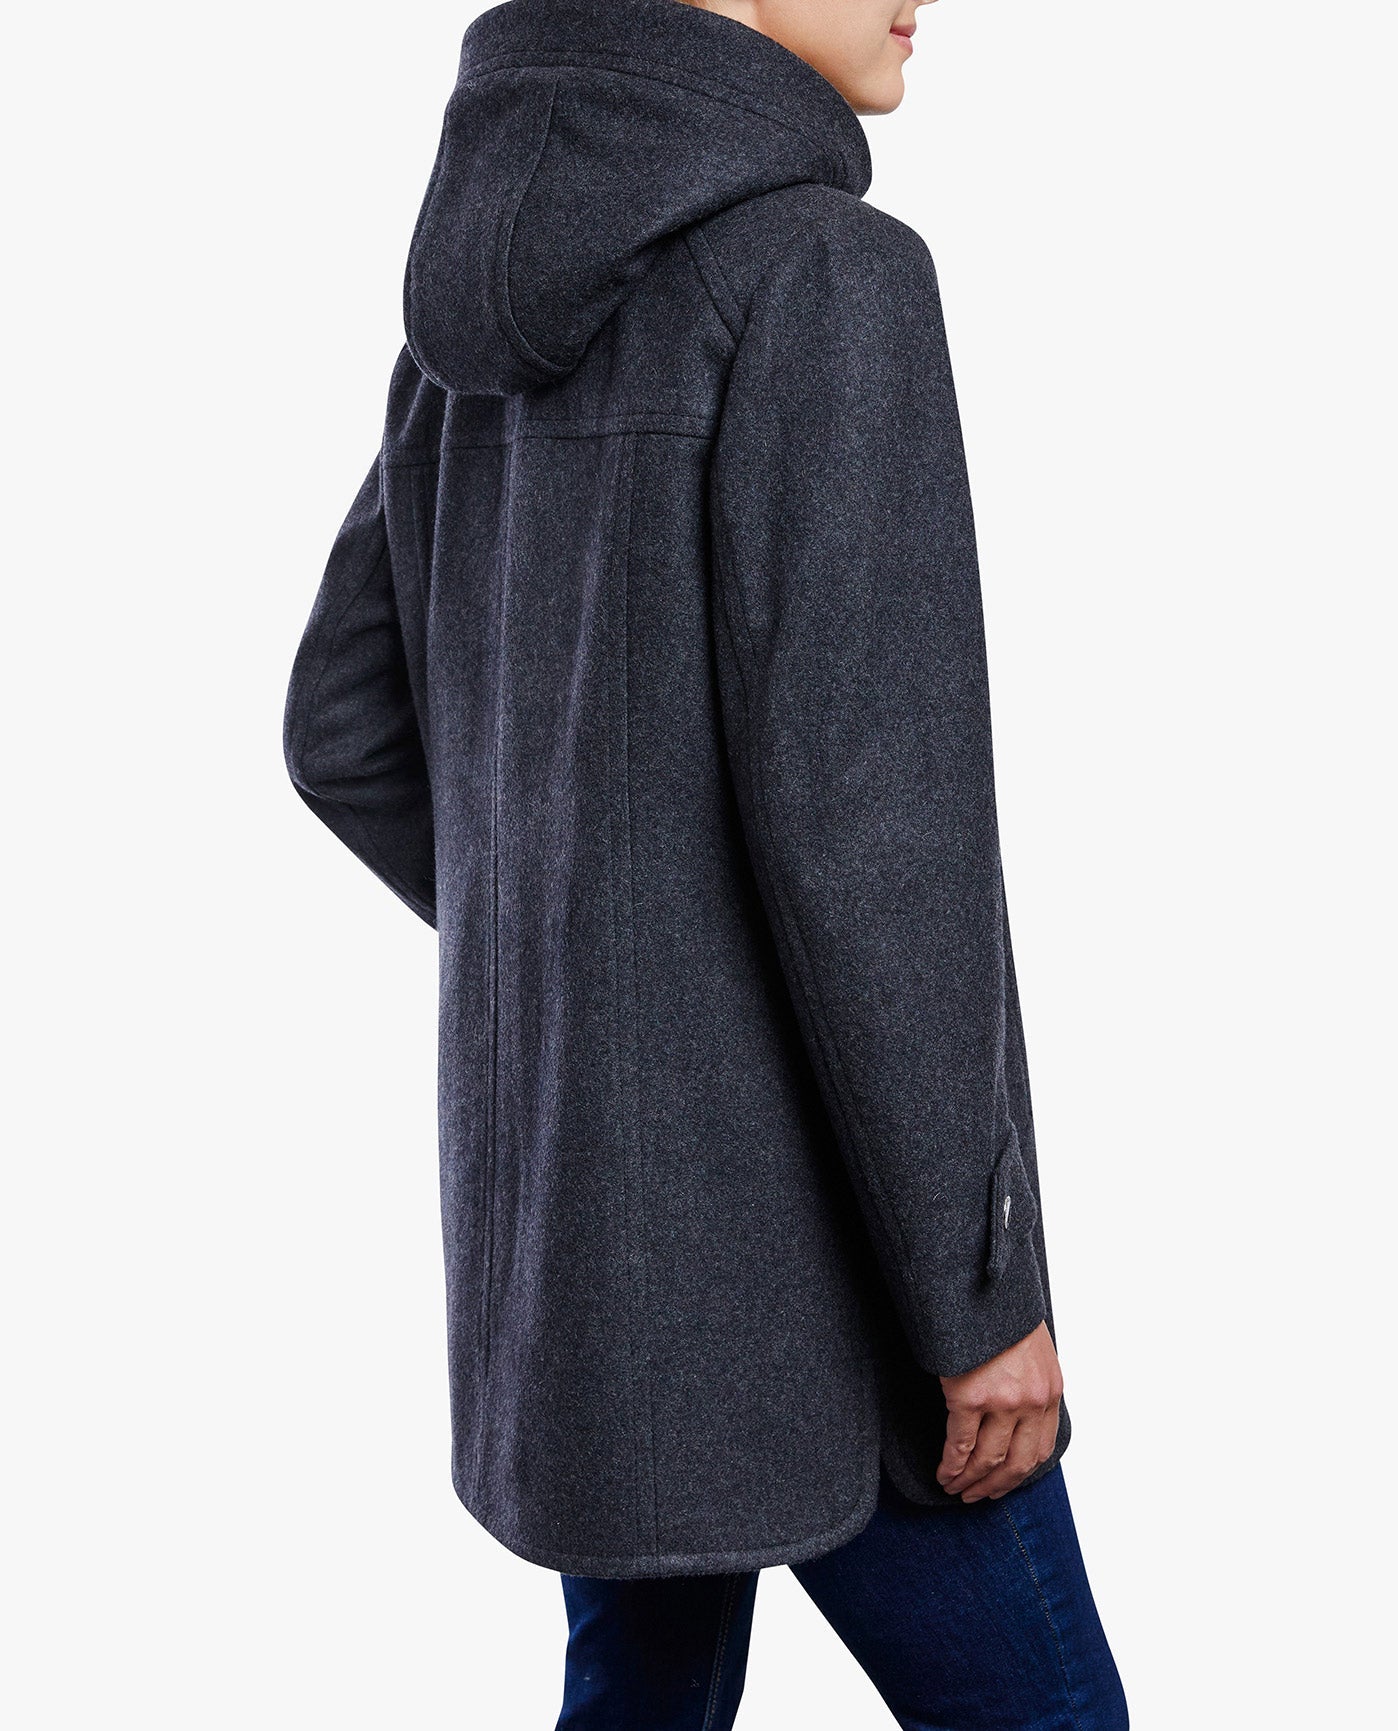 Back View Of ZIP-FRONT SHERPA LINED HOOD 31 INCH WOOL JACKET | CHARCOAL